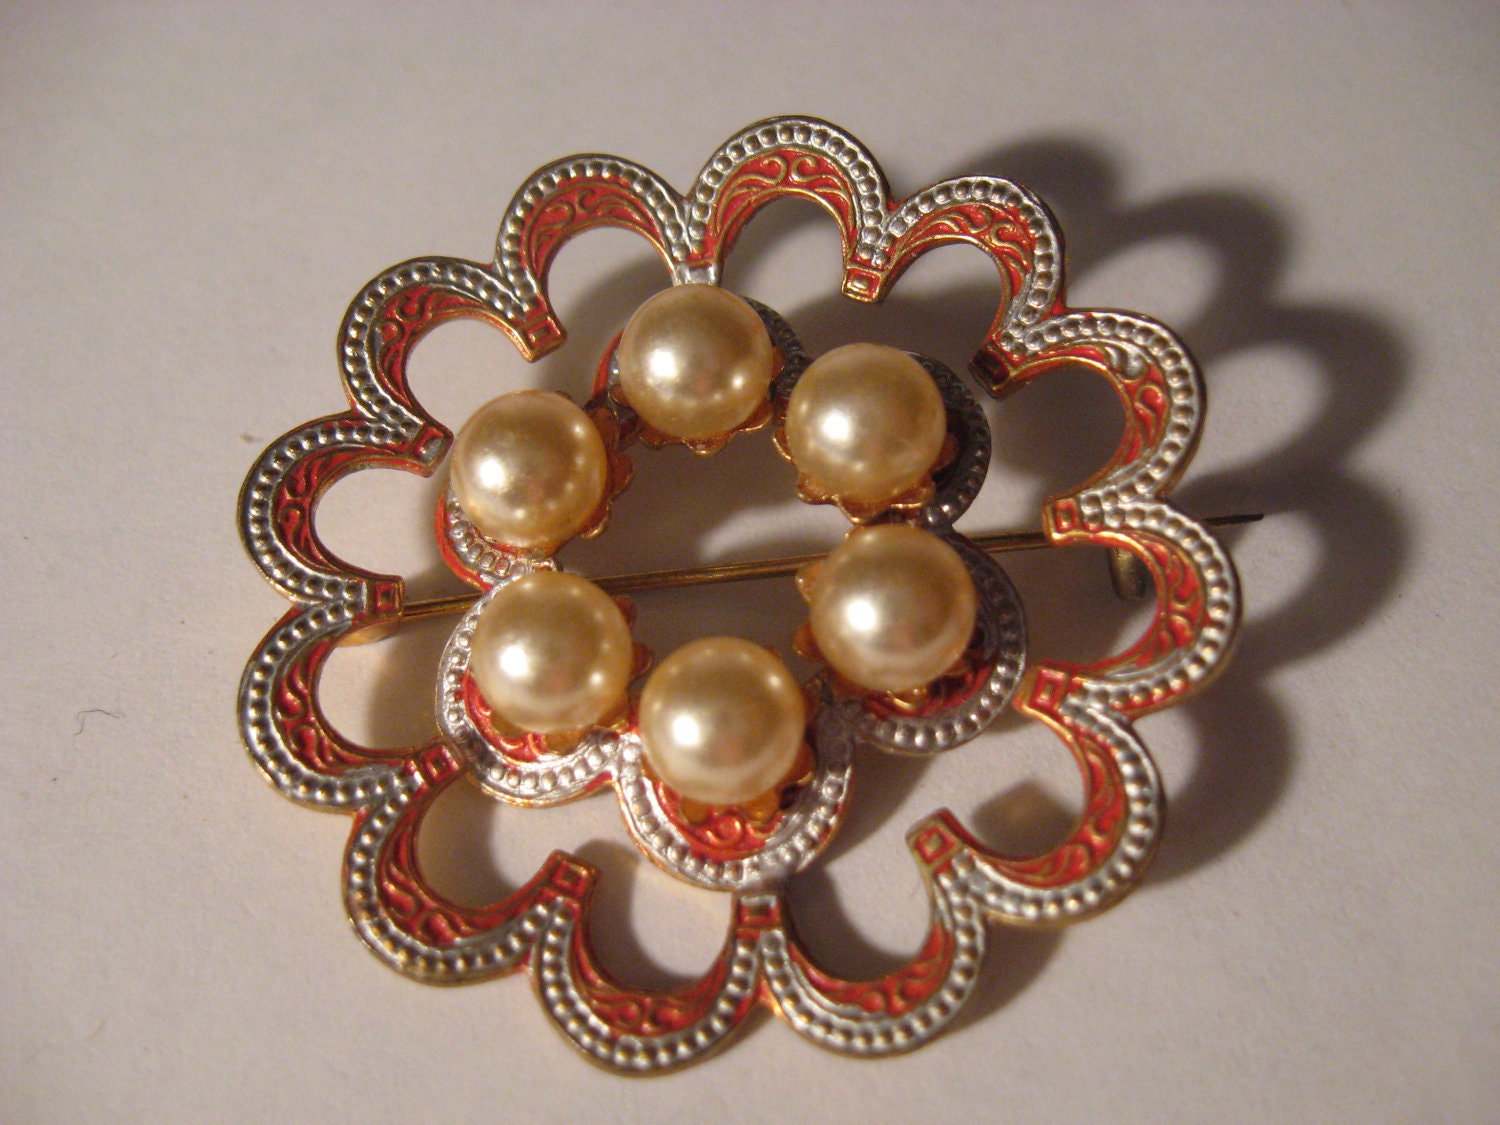 Vintage 1940s Antique Gold Gilt Silver & Enamel DAMASCENE Floral Brooch PIN w PEARLS Made in Spain